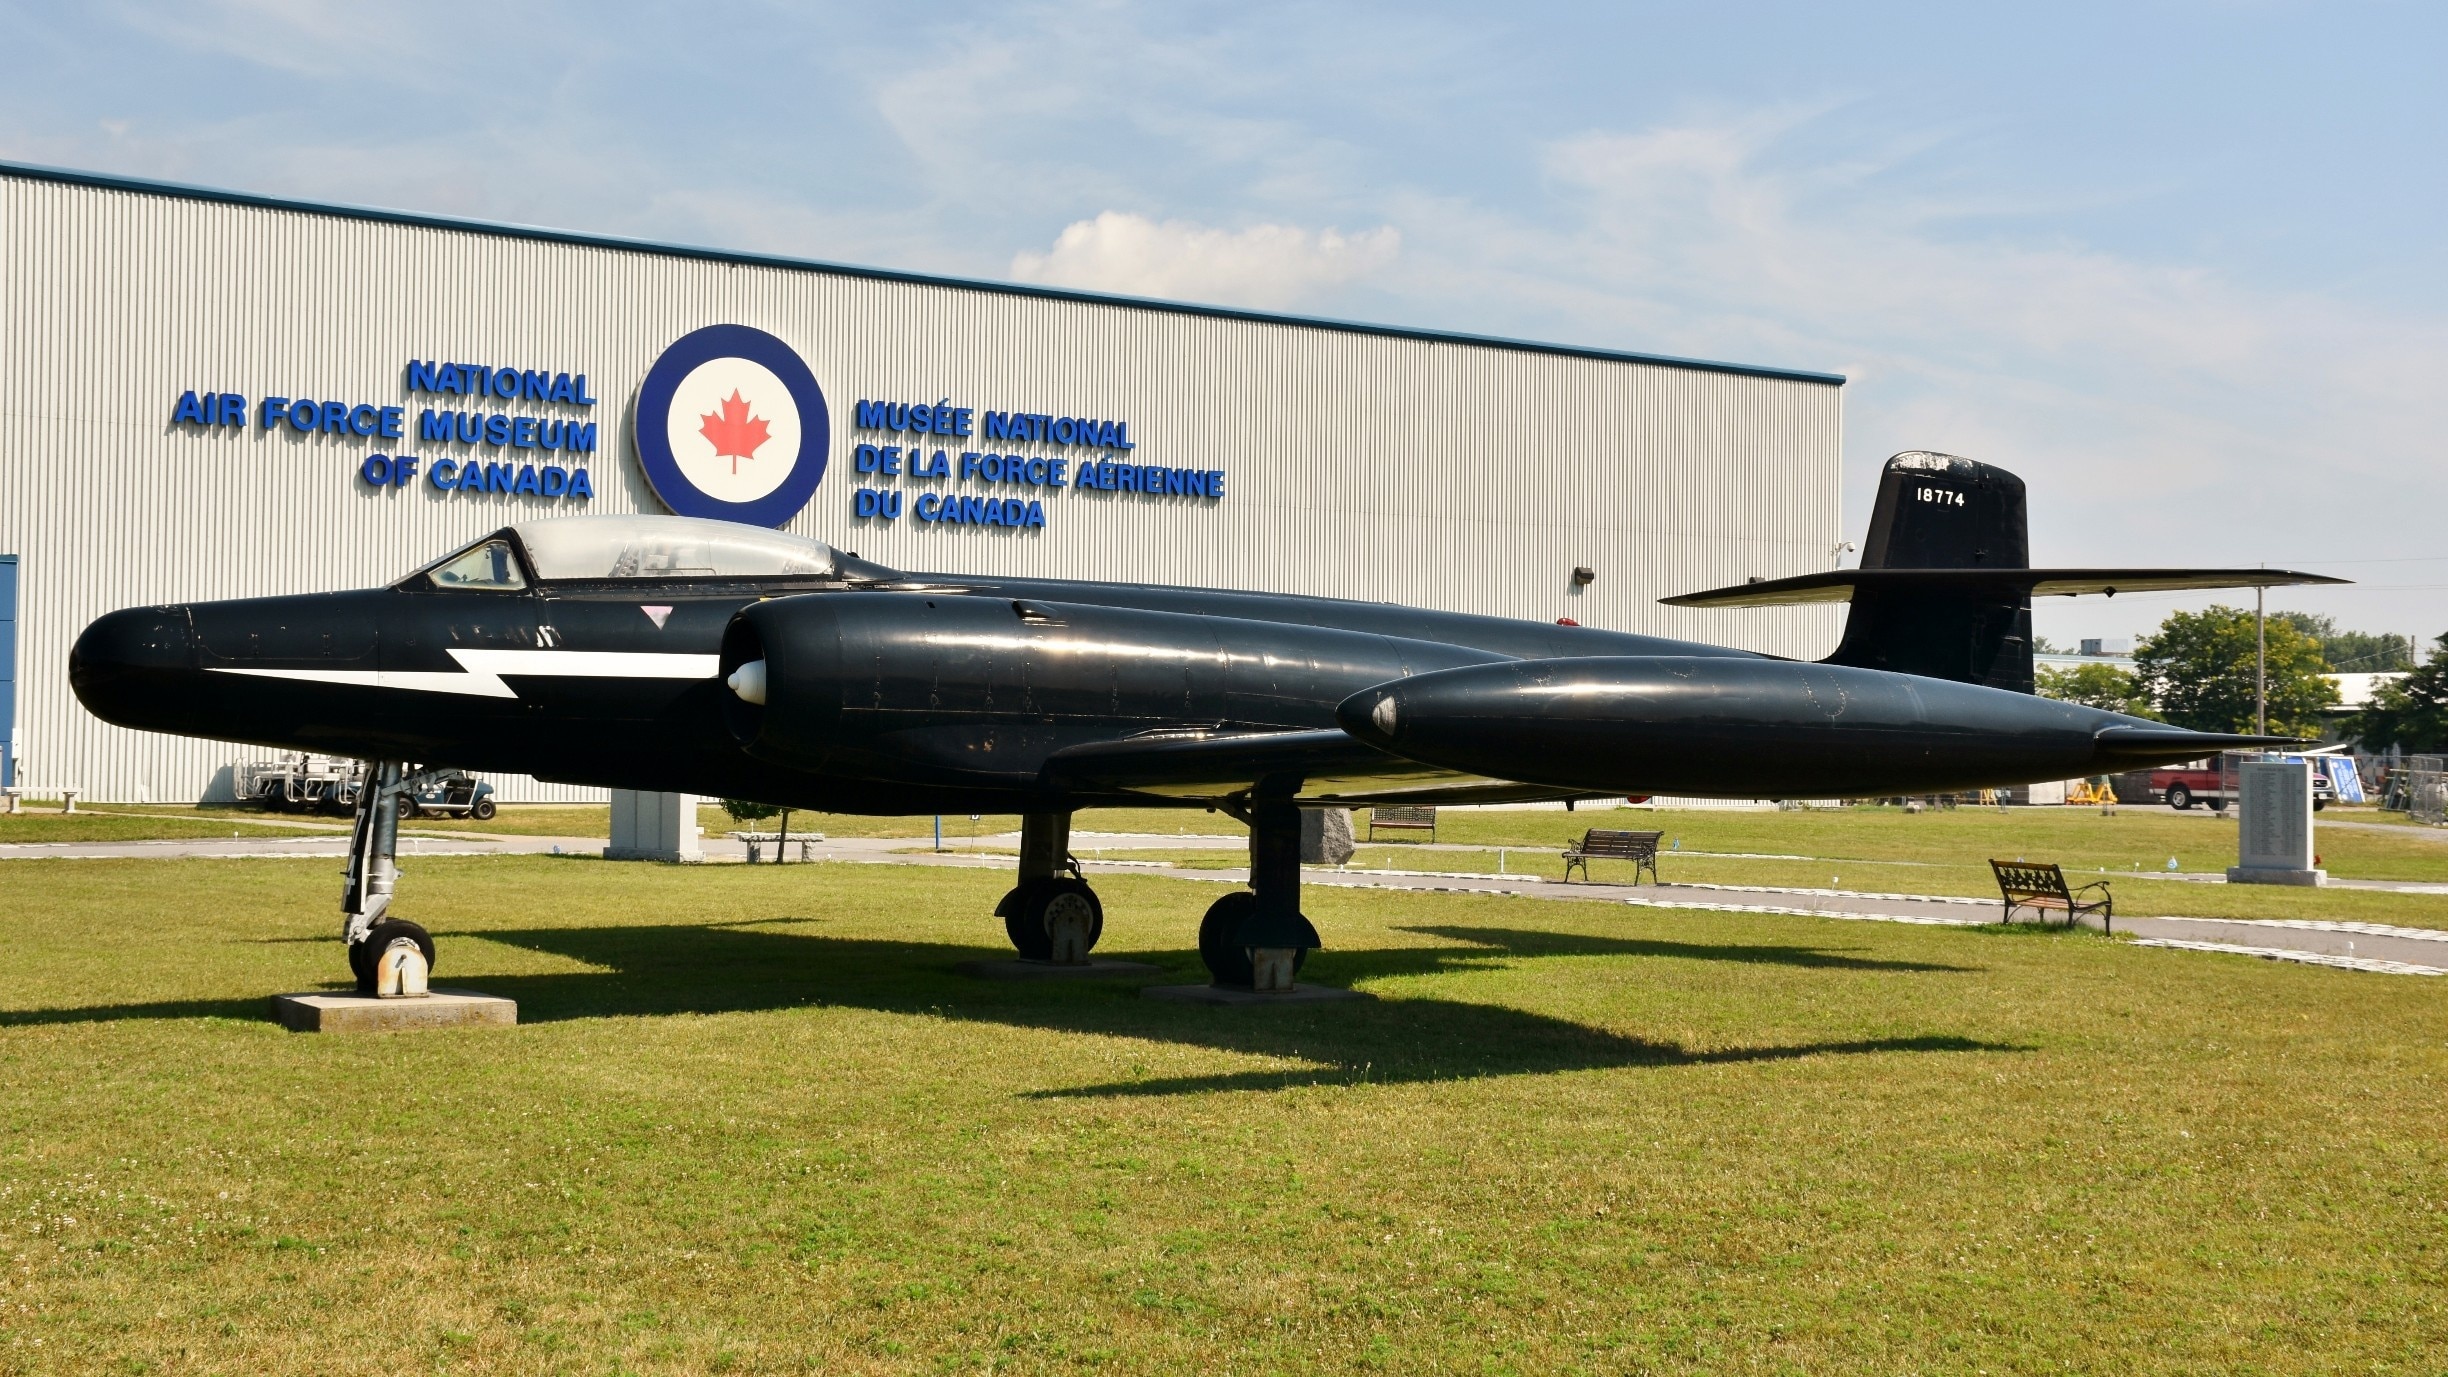 The National Air Force Museum of Canada, formerly known as the RCAF Memorial Museum, is an aviation museum dedicated to preserving the history of the Royal Canadian Air Force (RCAF) and is located on the west side of CFB Trenton in Trenton, Ontario.

Opened April 1, 1984 on the 60th anniversary of the establishment of the RCAF, it is home to a large collection of RCAF aircraft and artifacts.

The museum is a permanent archive which collects, preserves and displays Royal Canadian Air Force (RCAF) memorabilia, photographs, paintings and documents as a lasting tribute and memorial to all the men and women who served our nation in the RCAF and its predecessor organizations.